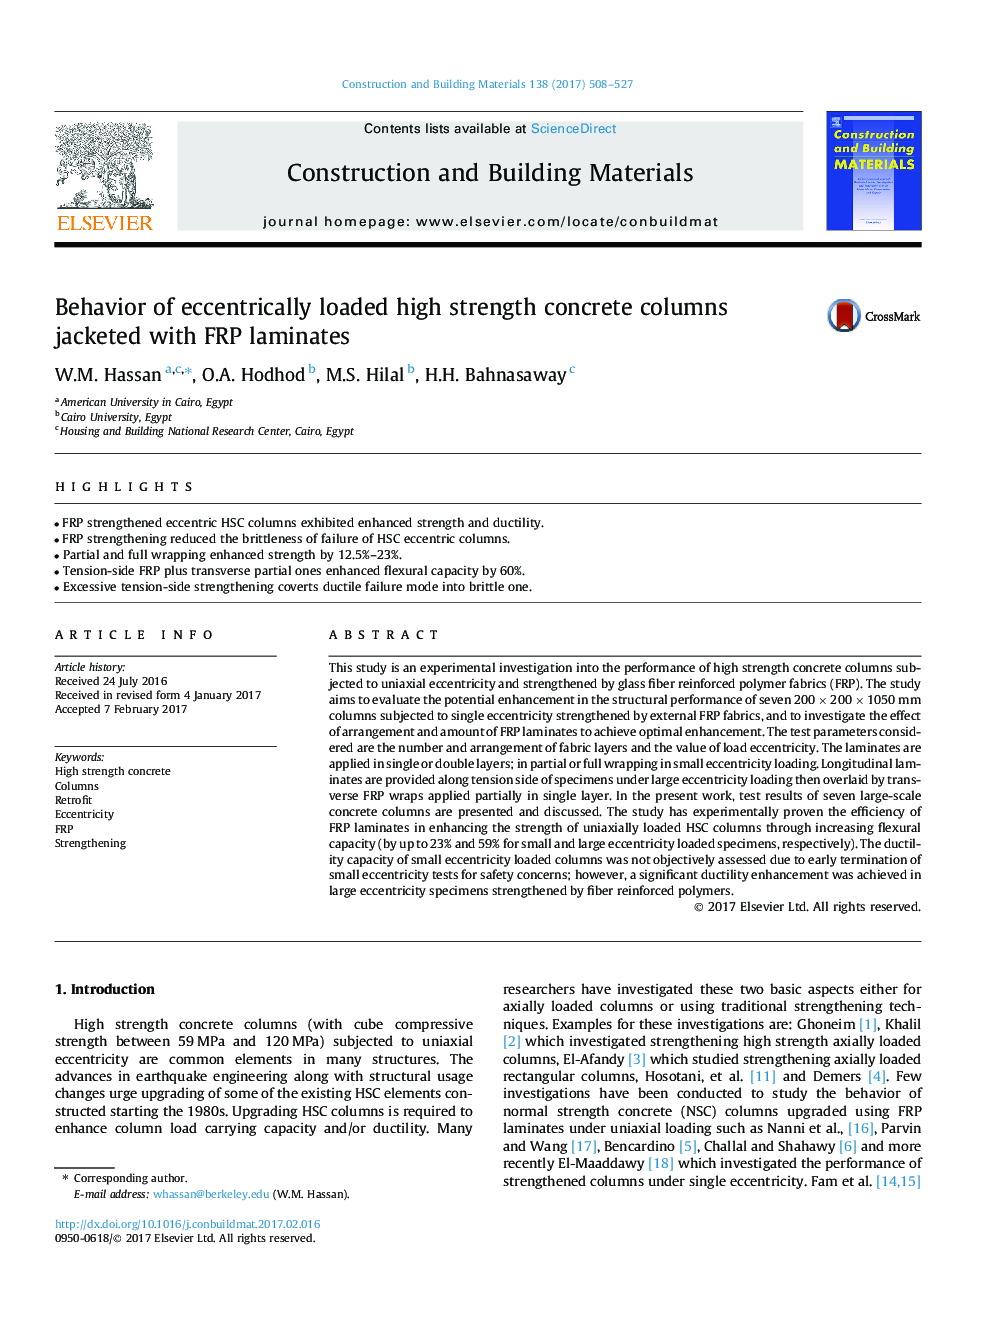 Behavior of eccentrically loaded high strength concrete columns jacketed with FRP laminates